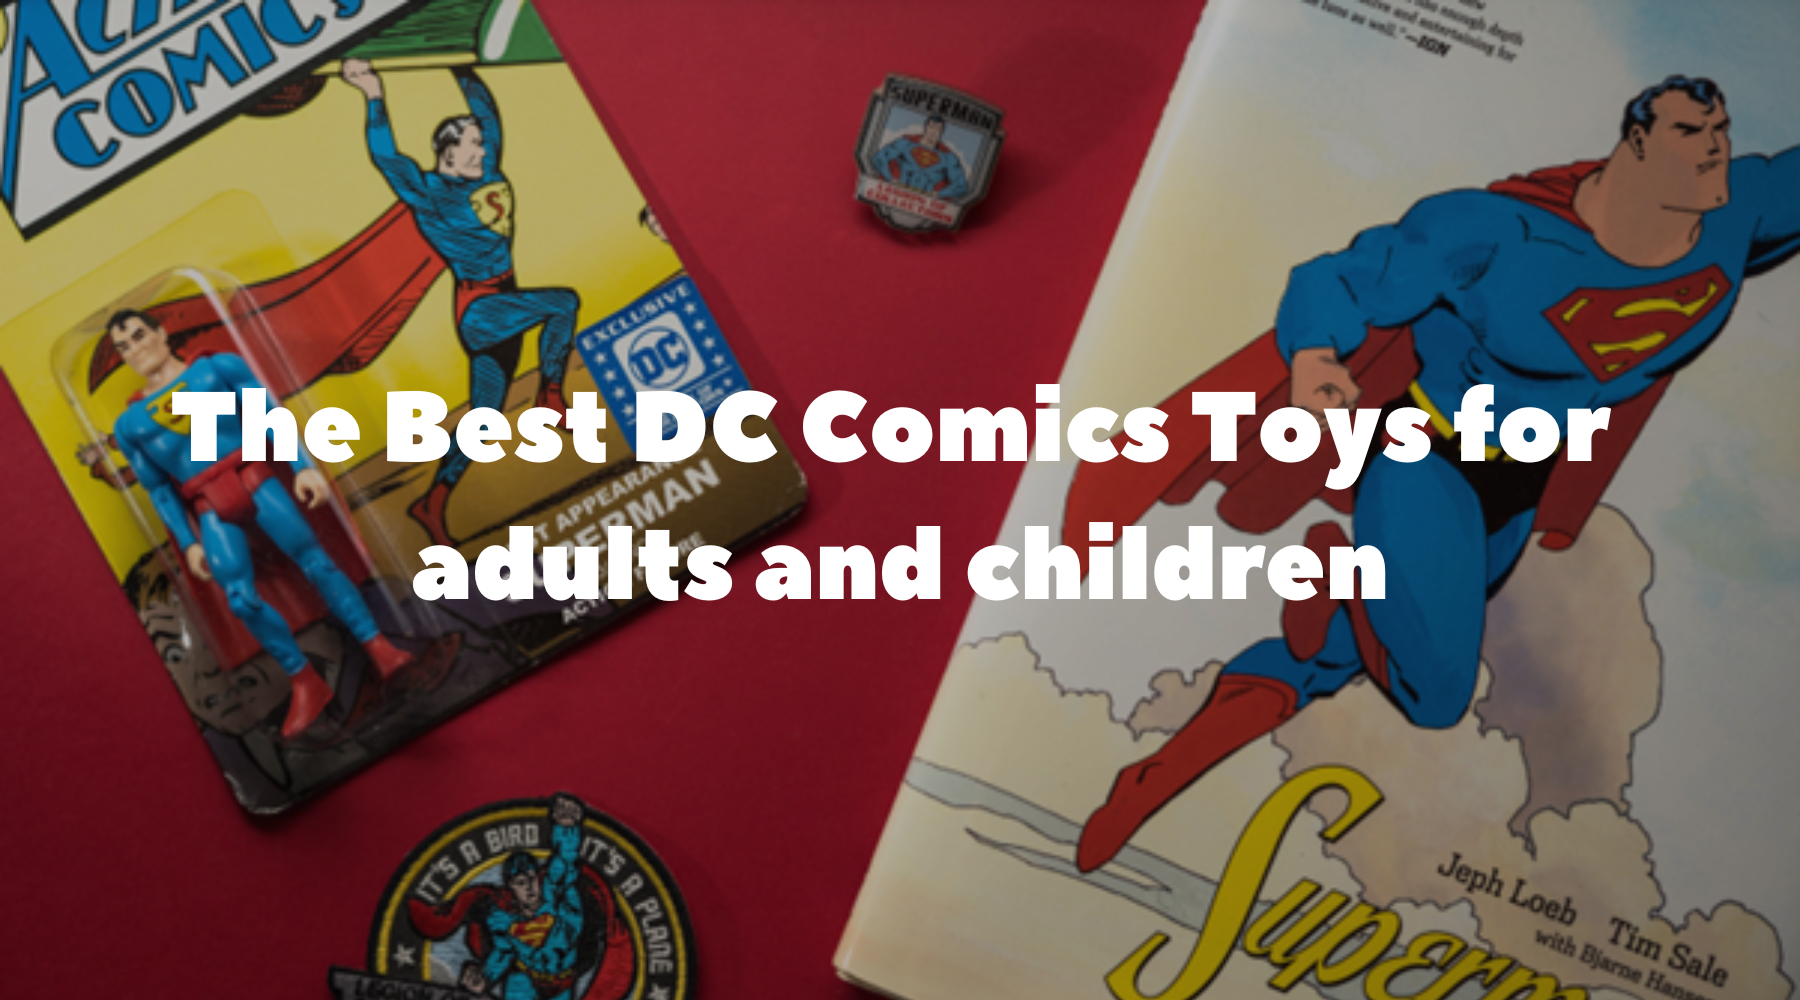 The Best DC Comics Toys for adults and children